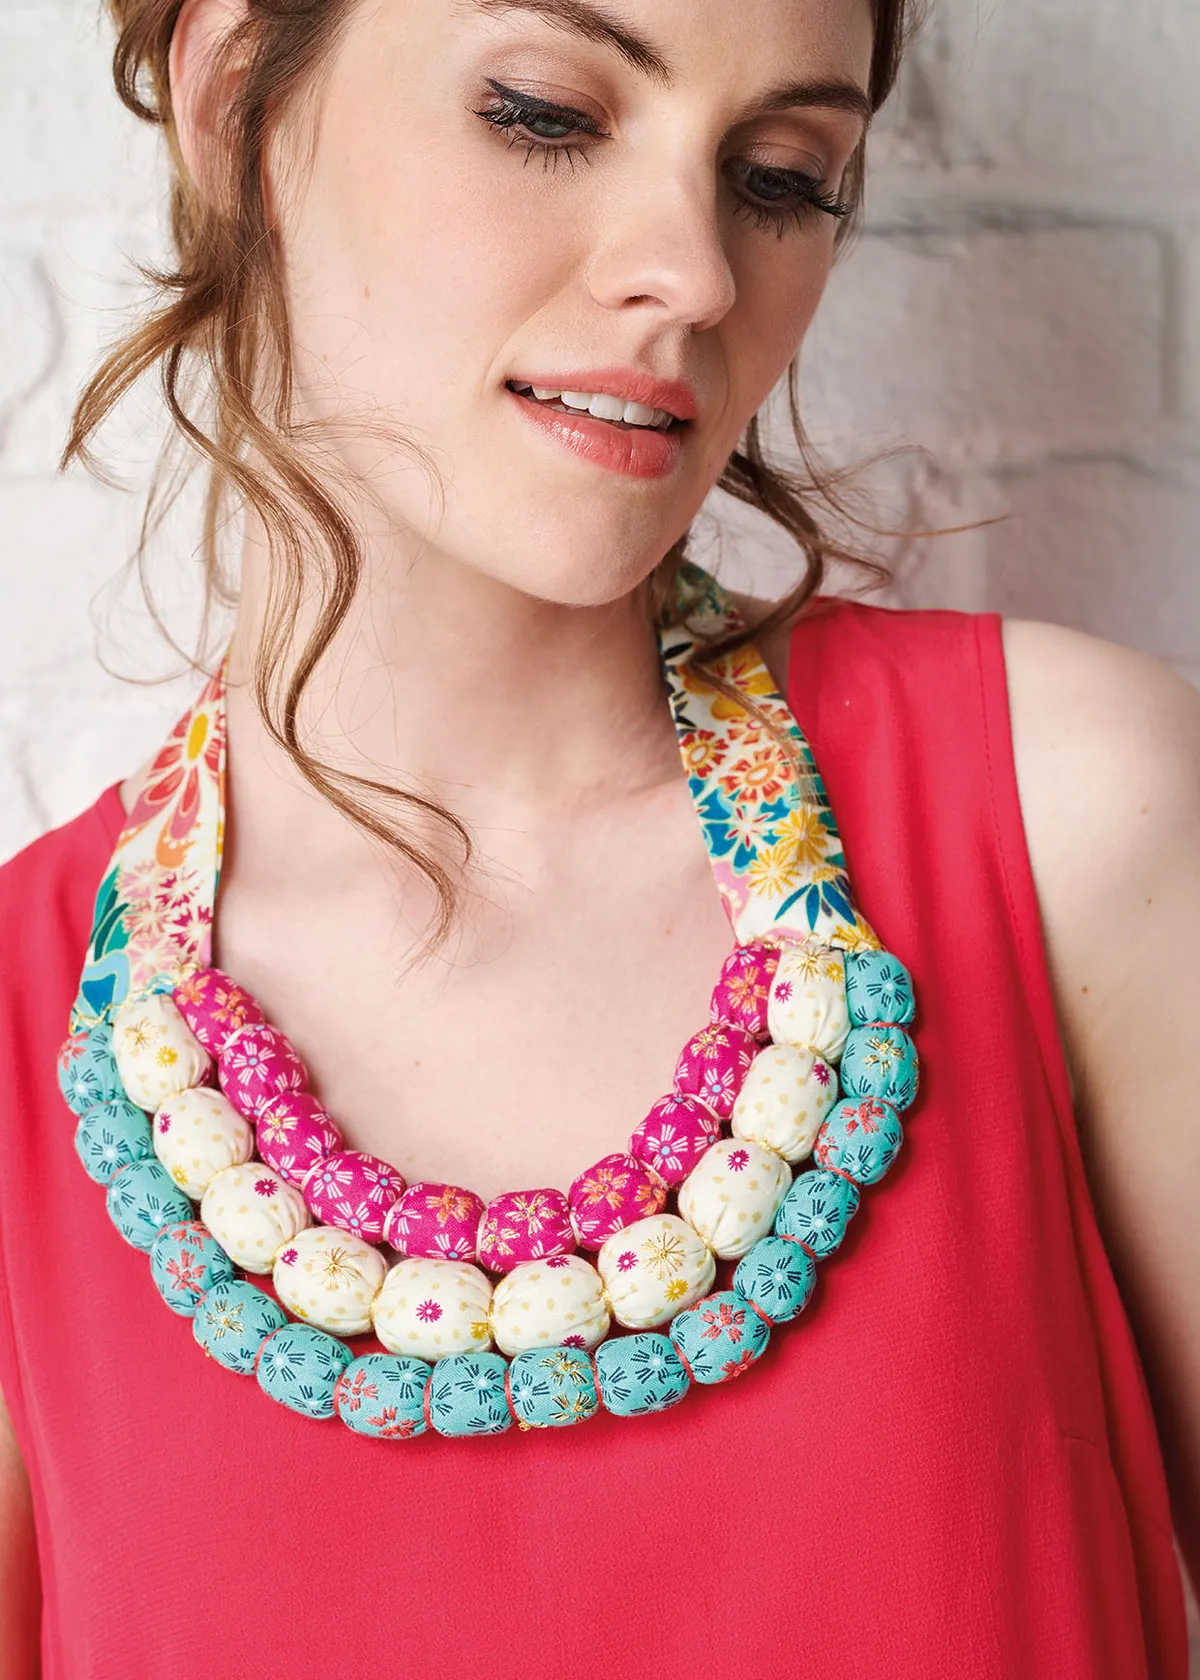 How to make a fabric necklace